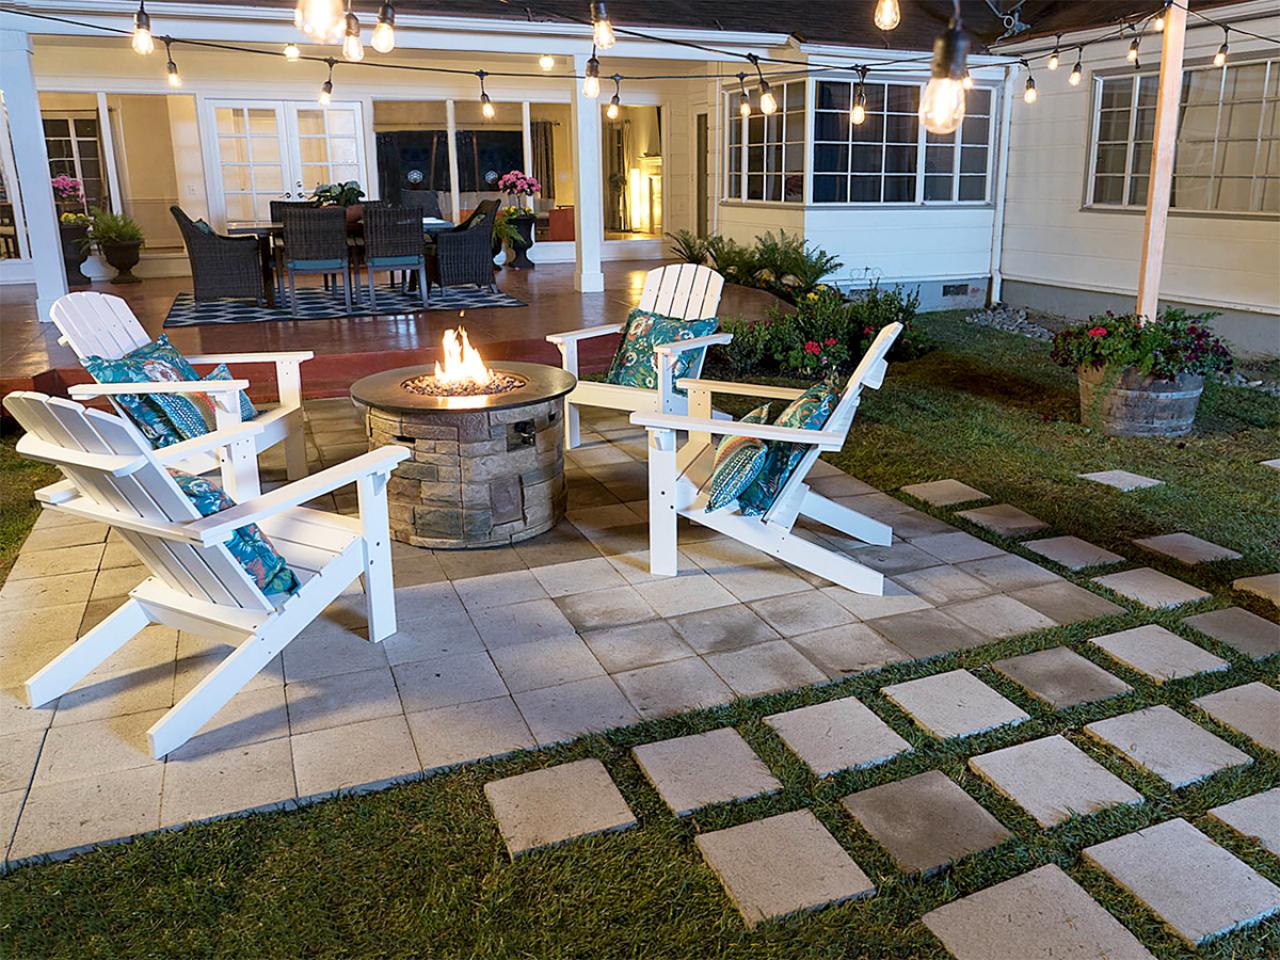 How To Lay A Paver Patio For Firepit, Can You Build A Fire Pit On Pavers